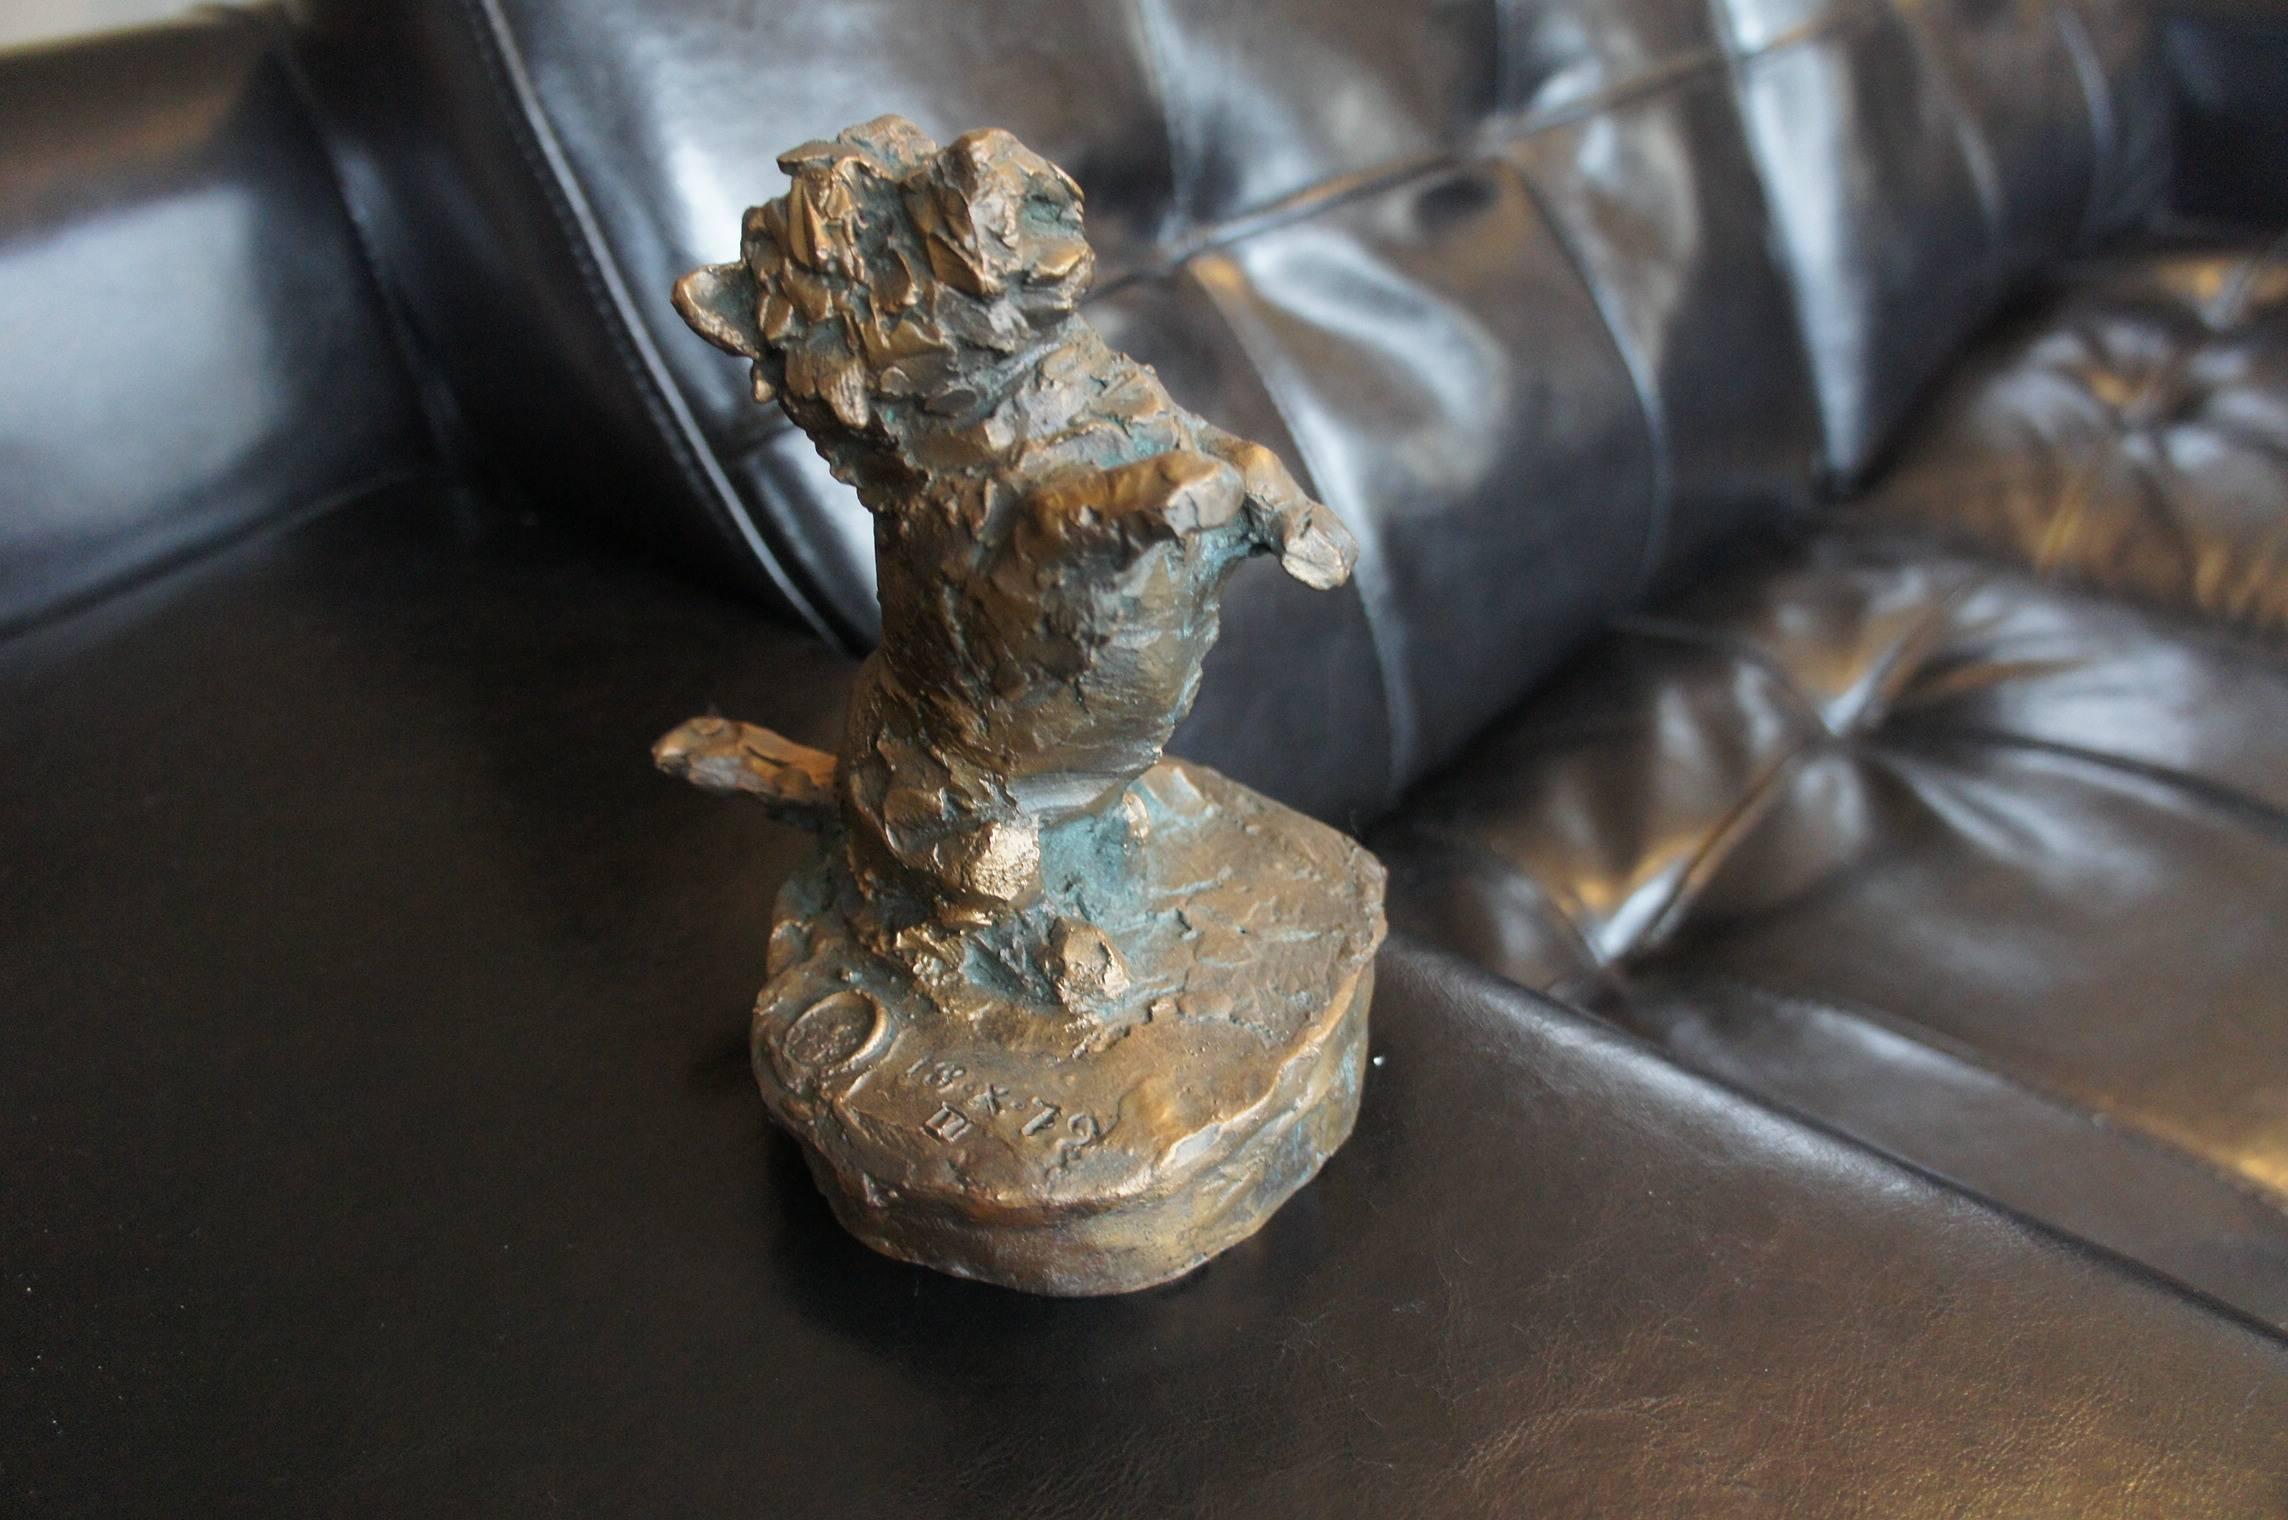 One of a kind Cairn terrier bronze.

This little but very accurate bronze sculpture is an absolute joy to own and look at. We recently acquired this wonderful sculpture and it was handcrafted in the 1970's. The former owner (who is no longer with